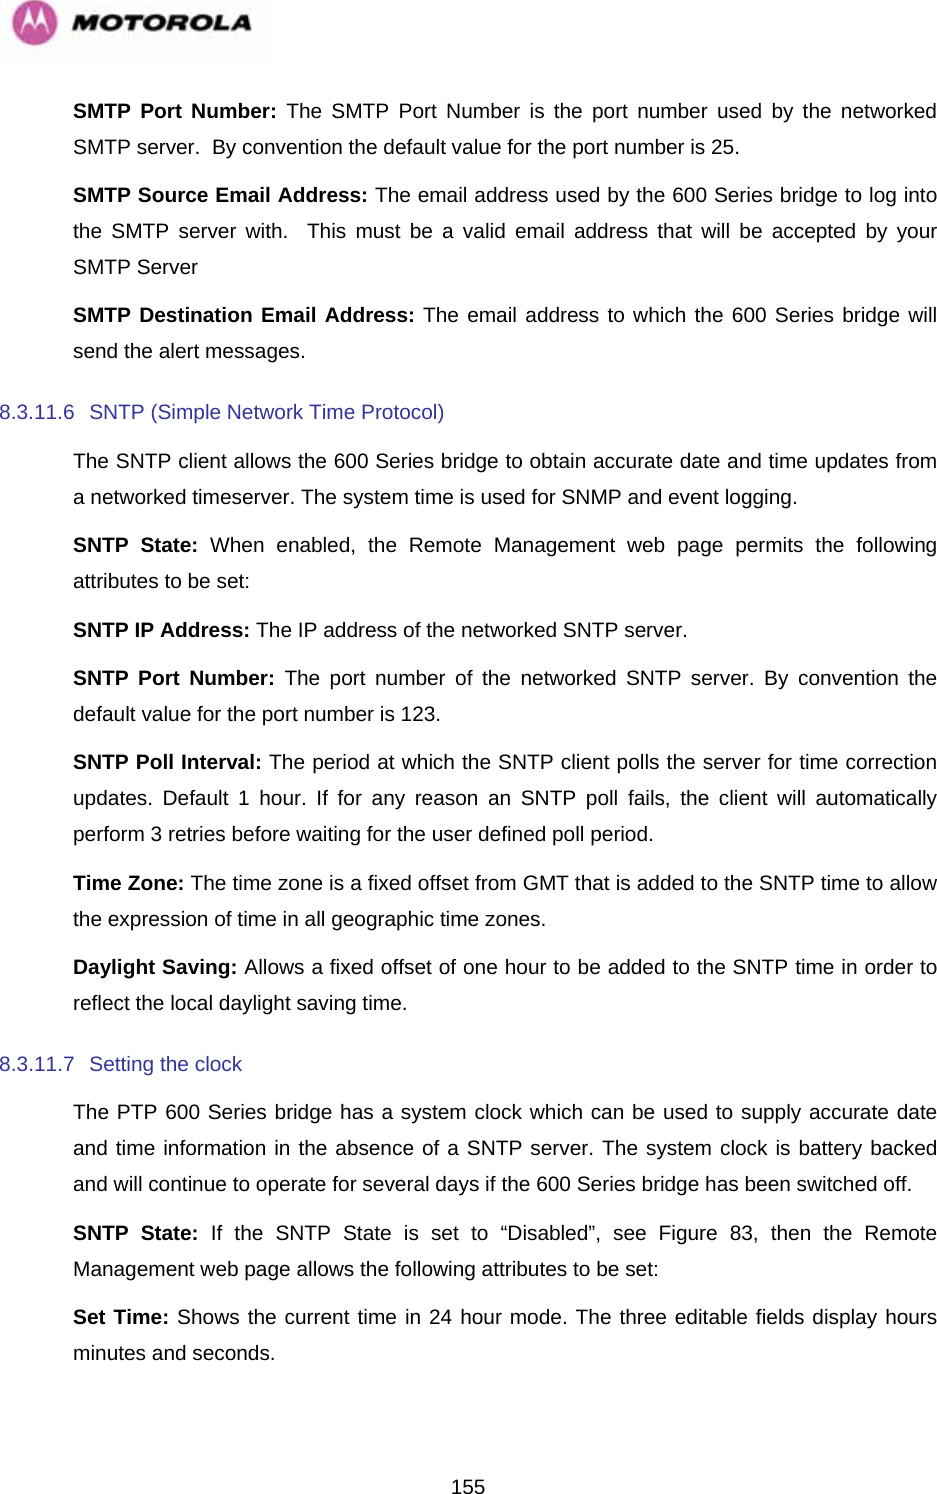   155SMTP Port Number: The SMTP Port Number is the port number used by the networked SMTP server.  By convention the default value for the port number is 25. SMTP Source Email Address: The email address used by the 600 Series bridge to log into the SMTP server with.  This must be a valid email address that will be accepted by your SMTP Server SMTP Destination Email Address: The email address to which the 600 Series bridge will send the alert messages. 8.3.11.6  SNTP (Simple Network Time Protocol) The SNTP client allows the 600 Series bridge to obtain accurate date and time updates from a networked timeserver. The system time is used for SNMP and event logging. SNTP State: When enabled, the Remote Management web page permits the following attributes to be set: SNTP IP Address: The IP address of the networked SNTP server. SNTP Port Number: The port number of the networked SNTP server. By convention the default value for the port number is 123. SNTP Poll Interval: The period at which the SNTP client polls the server for time correction updates. Default 1 hour. If for any reason an SNTP poll fails, the client will automatically perform 3 retries before waiting for the user defined poll period. Time Zone: The time zone is a fixed offset from GMT that is added to the SNTP time to allow the expression of time in all geographic time zones. Daylight Saving: Allows a fixed offset of one hour to be added to the SNTP time in order to reflect the local daylight saving time. 8.3.11.7  Setting the clock  The PTP 600 Series bridge has a system clock which can be used to supply accurate date and time information in the absence of a SNTP server. The system clock is battery backed and will continue to operate for several days if the 600 Series bridge has been switched off. SNTP State: If the SNTP State is set to “Disabled”, see Figure 83, then the Remote Management web page allows the following attributes to be set: Set Time: Shows the current time in 24 hour mode. The three editable fields display hours minutes and seconds. 